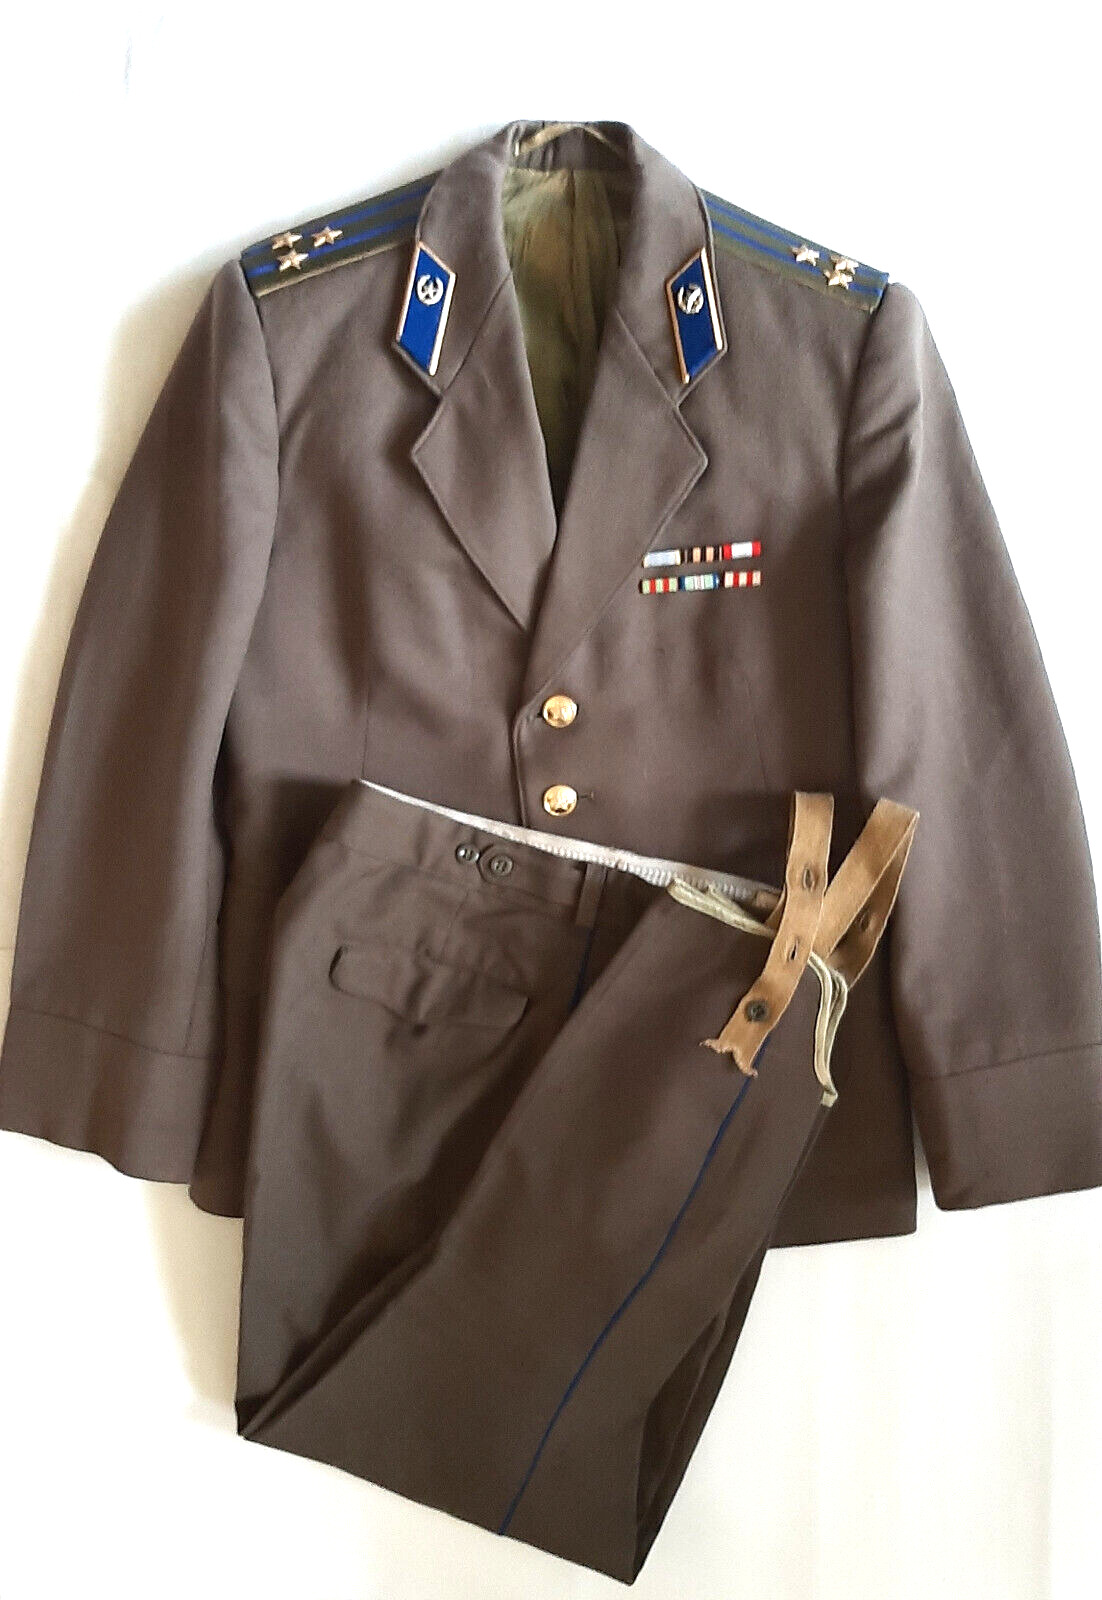 Soviet colonel KGB jacket and pants